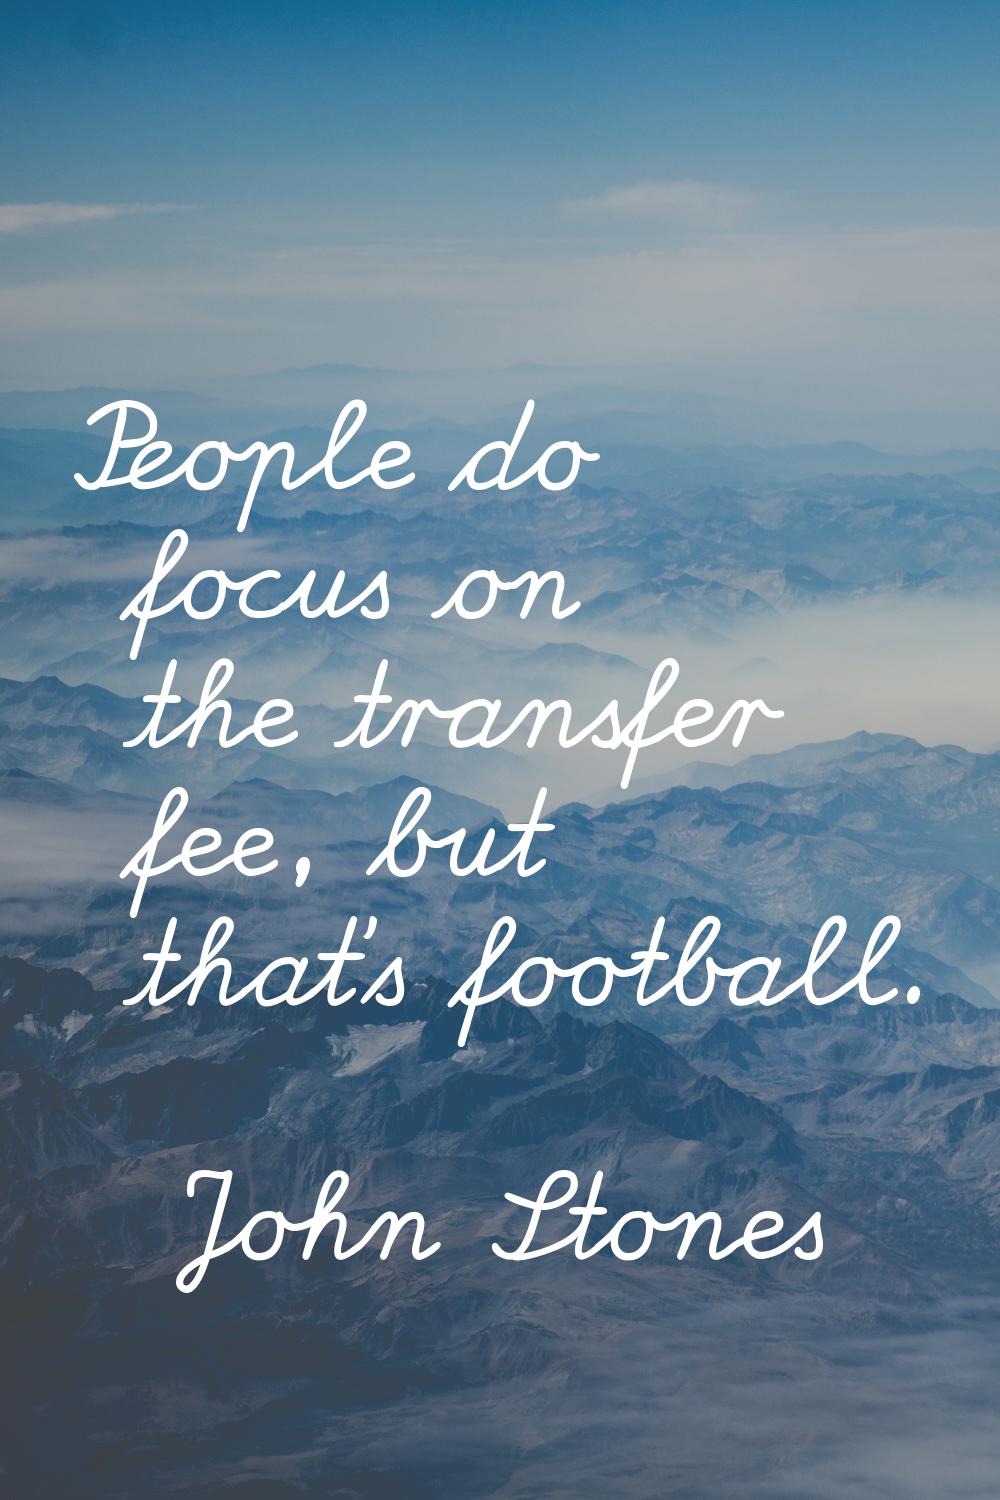 People do focus on the transfer fee, but that's football.